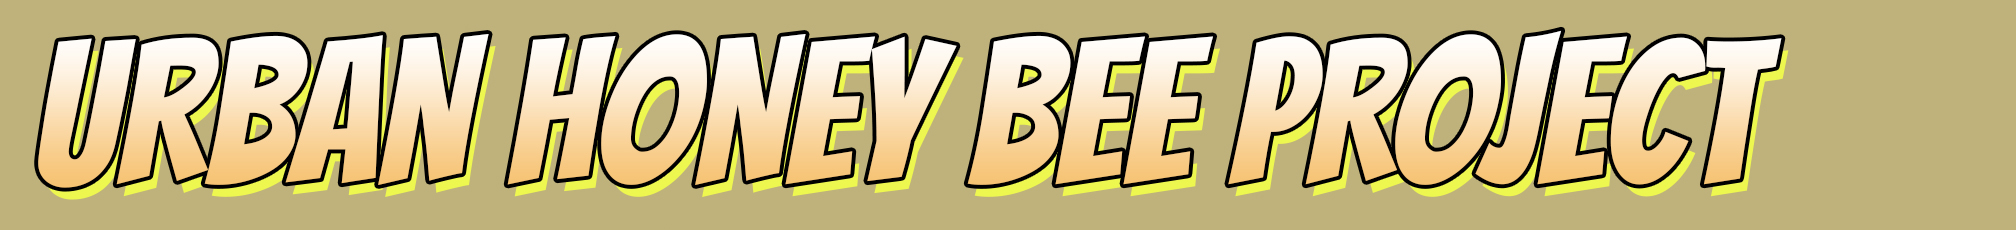 URBAN HONEY BEE PROJECT in comic font with comic-style honeybees on a hive graphic.